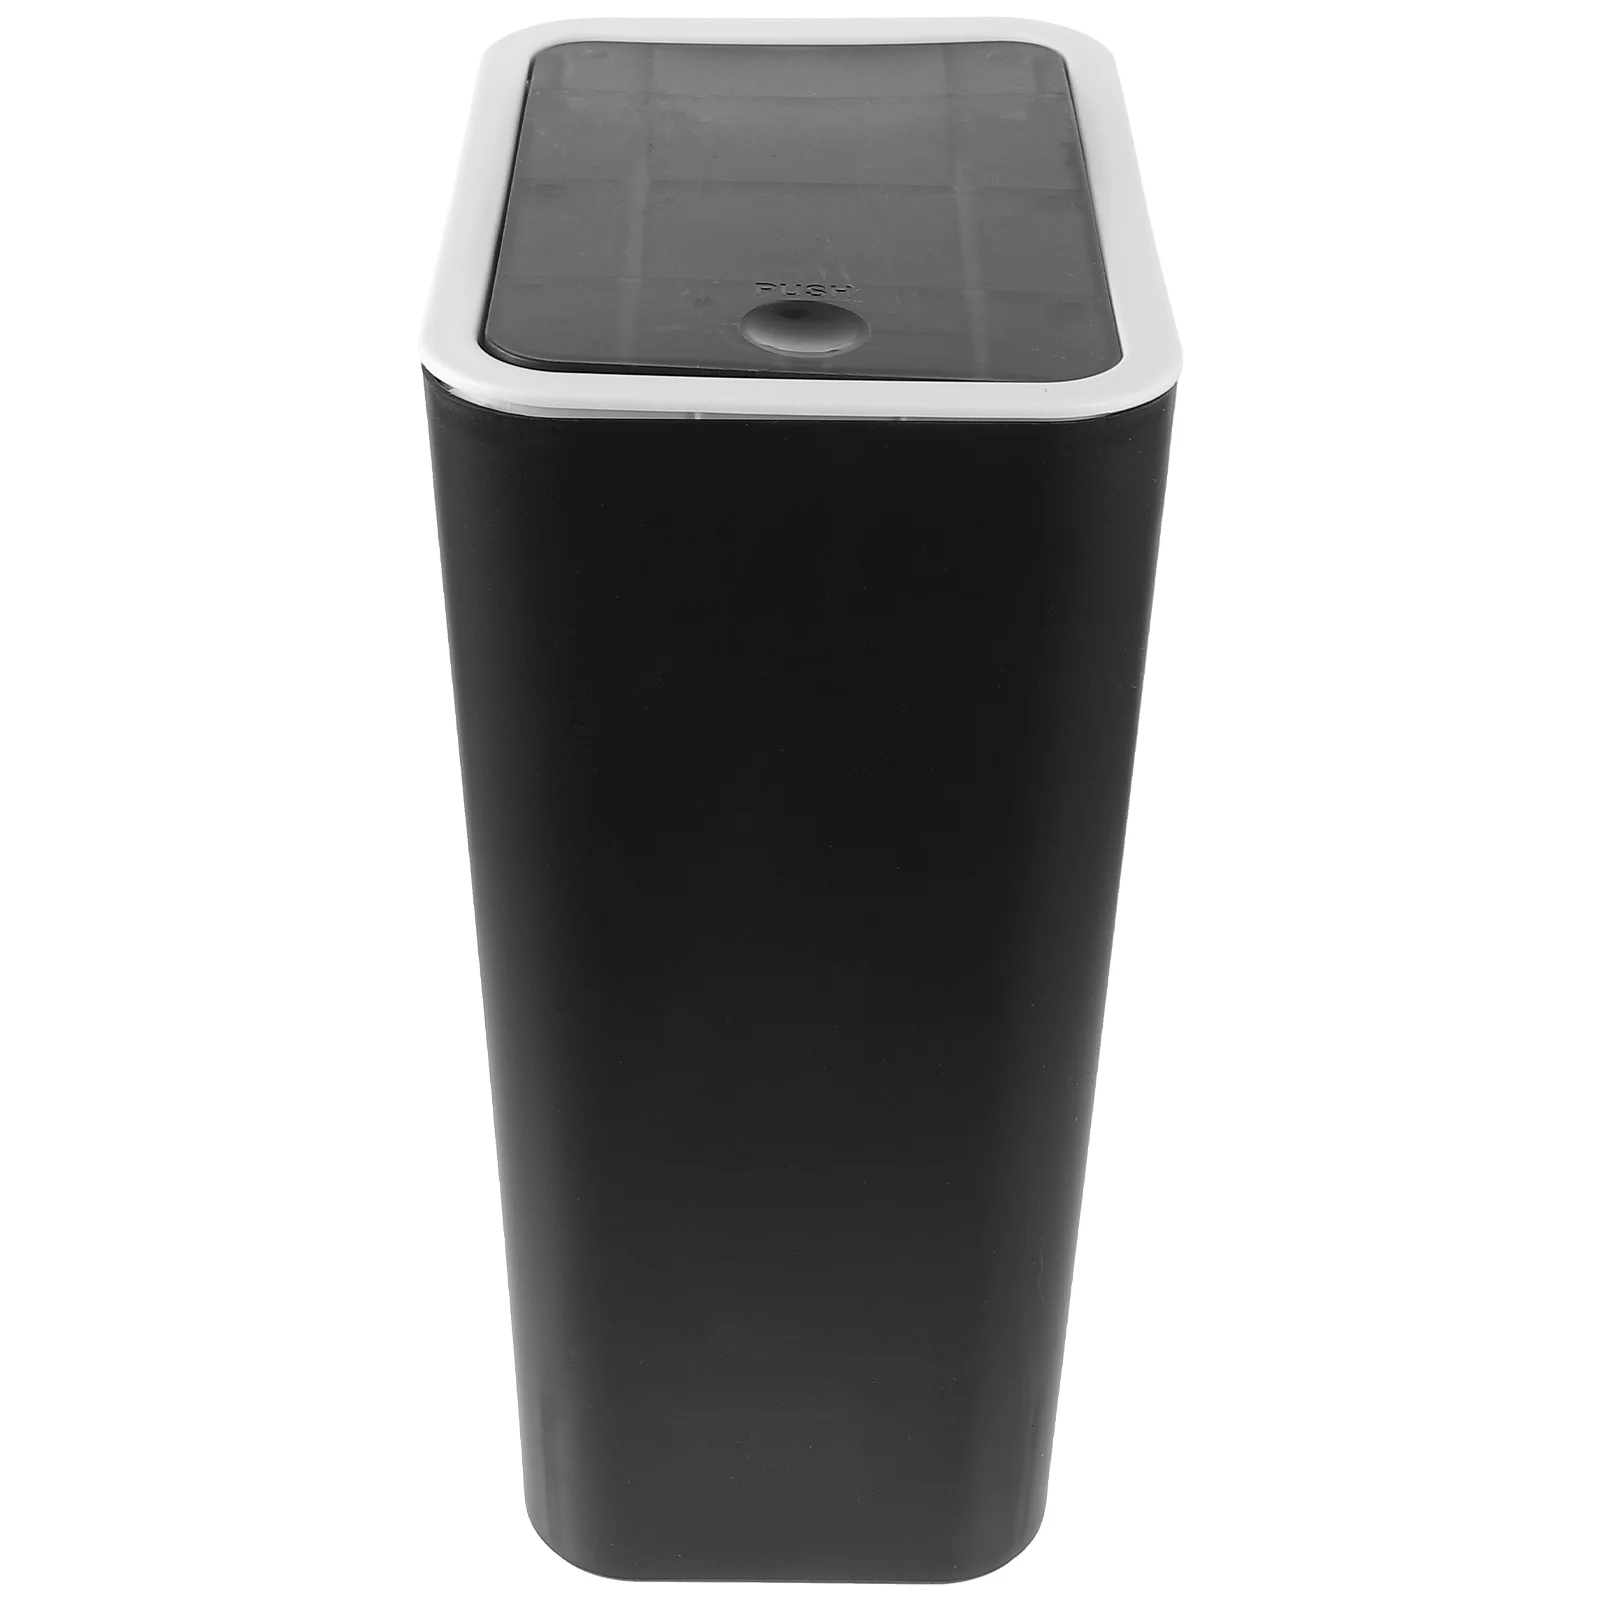 

Sorting Trash Can Office Cans Bathroom Bin Small with Lid Indoor Garbage Pp Waste